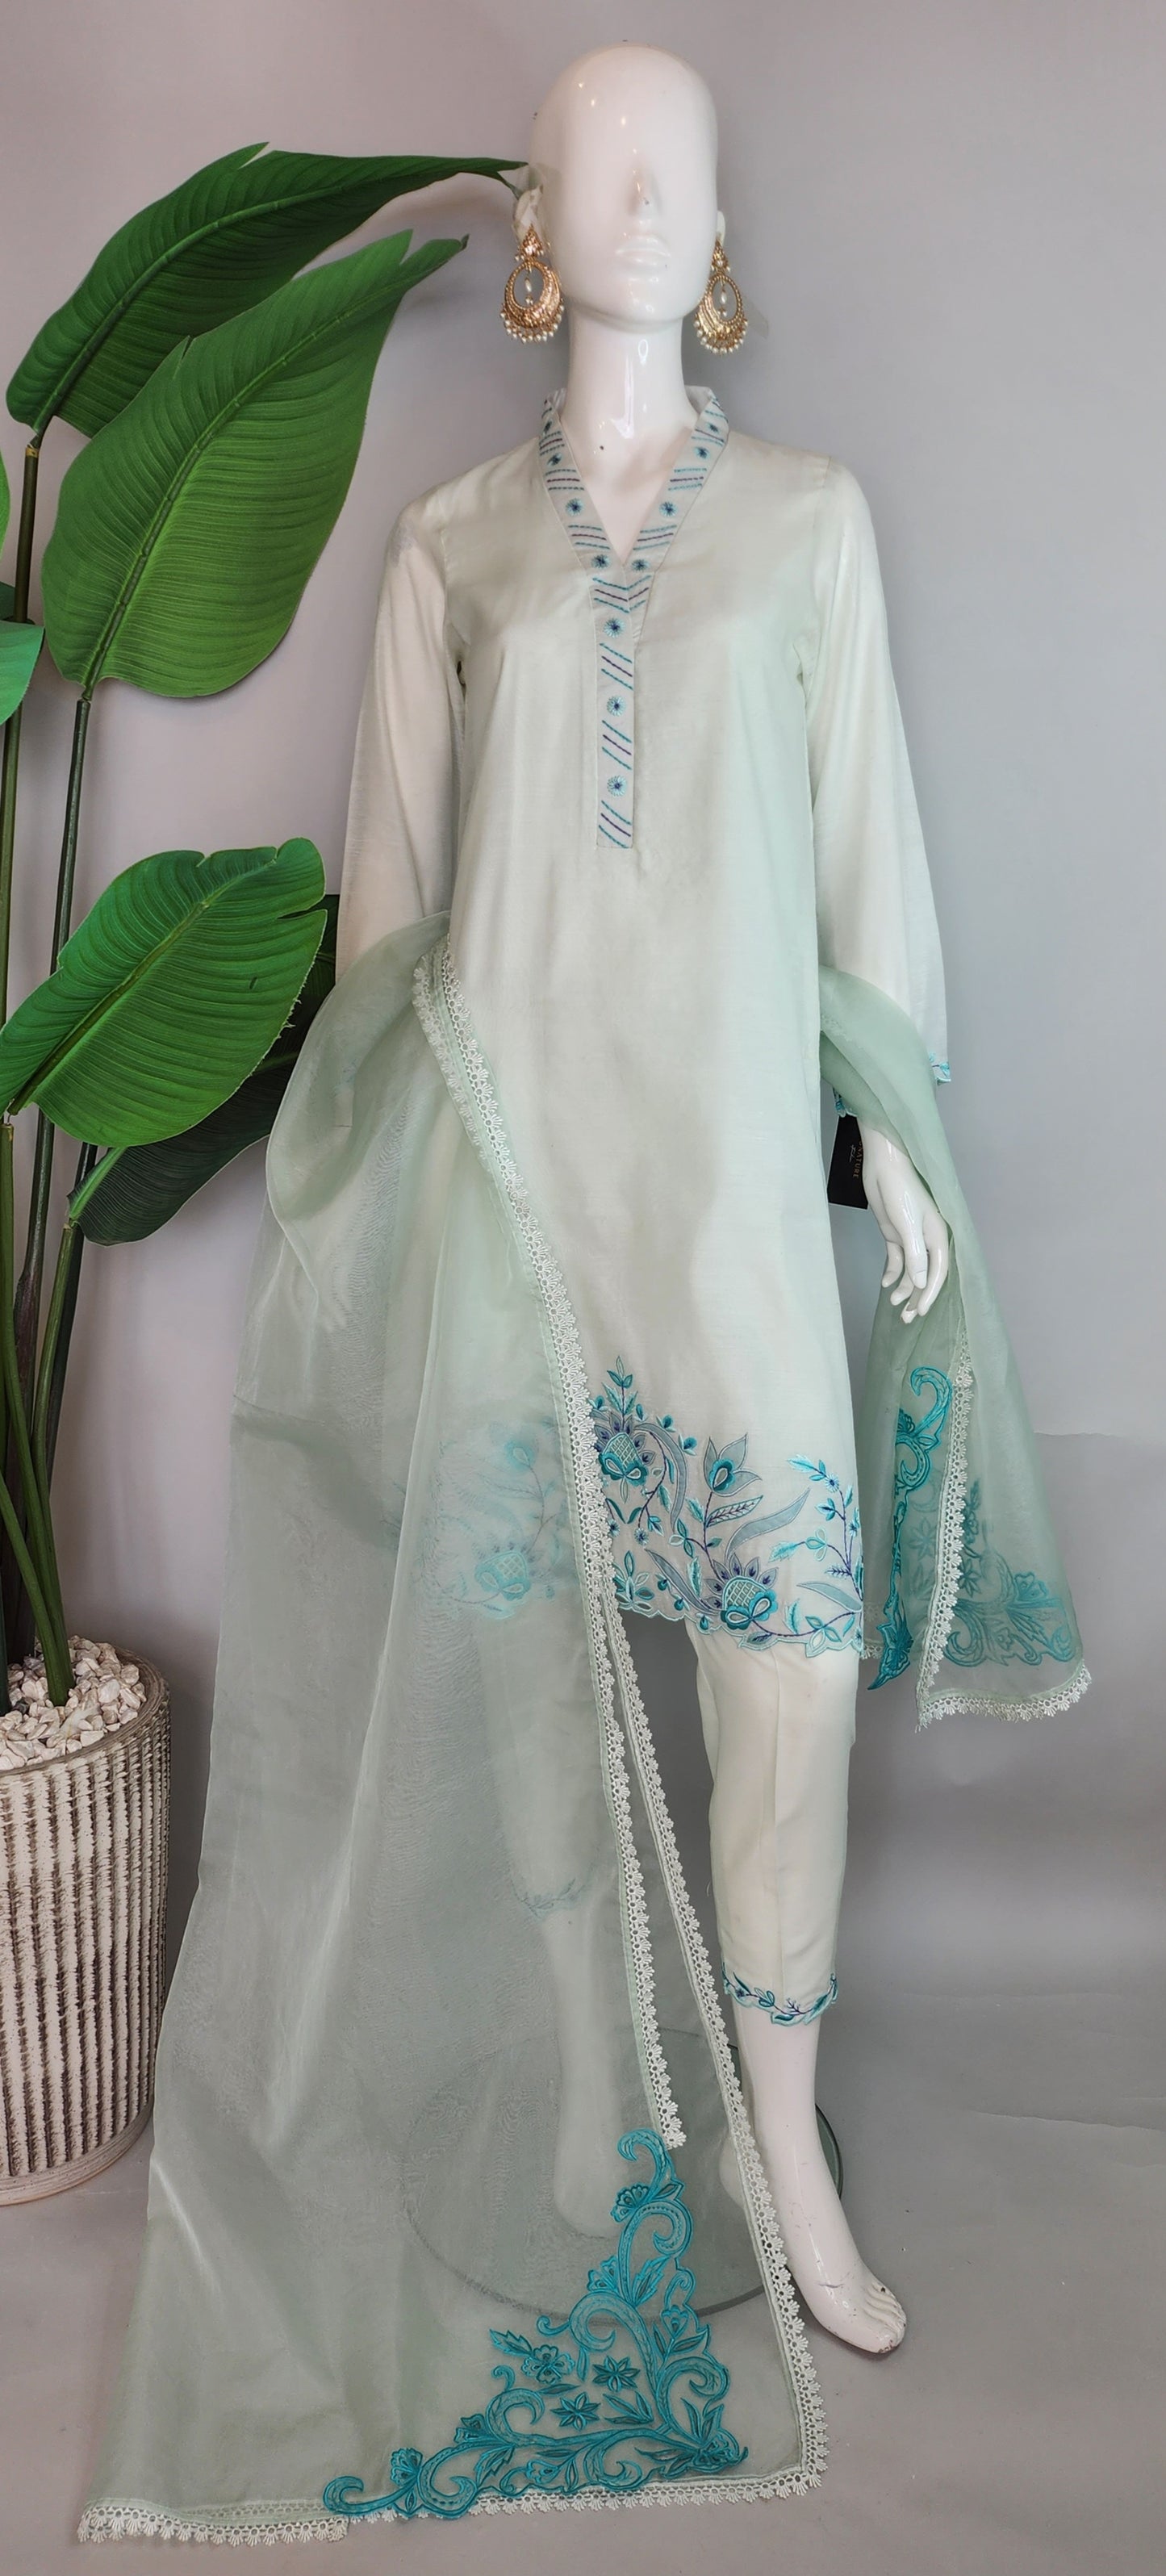 AISHA AHMED - Powder Green Cutwork and Embroidered Suit